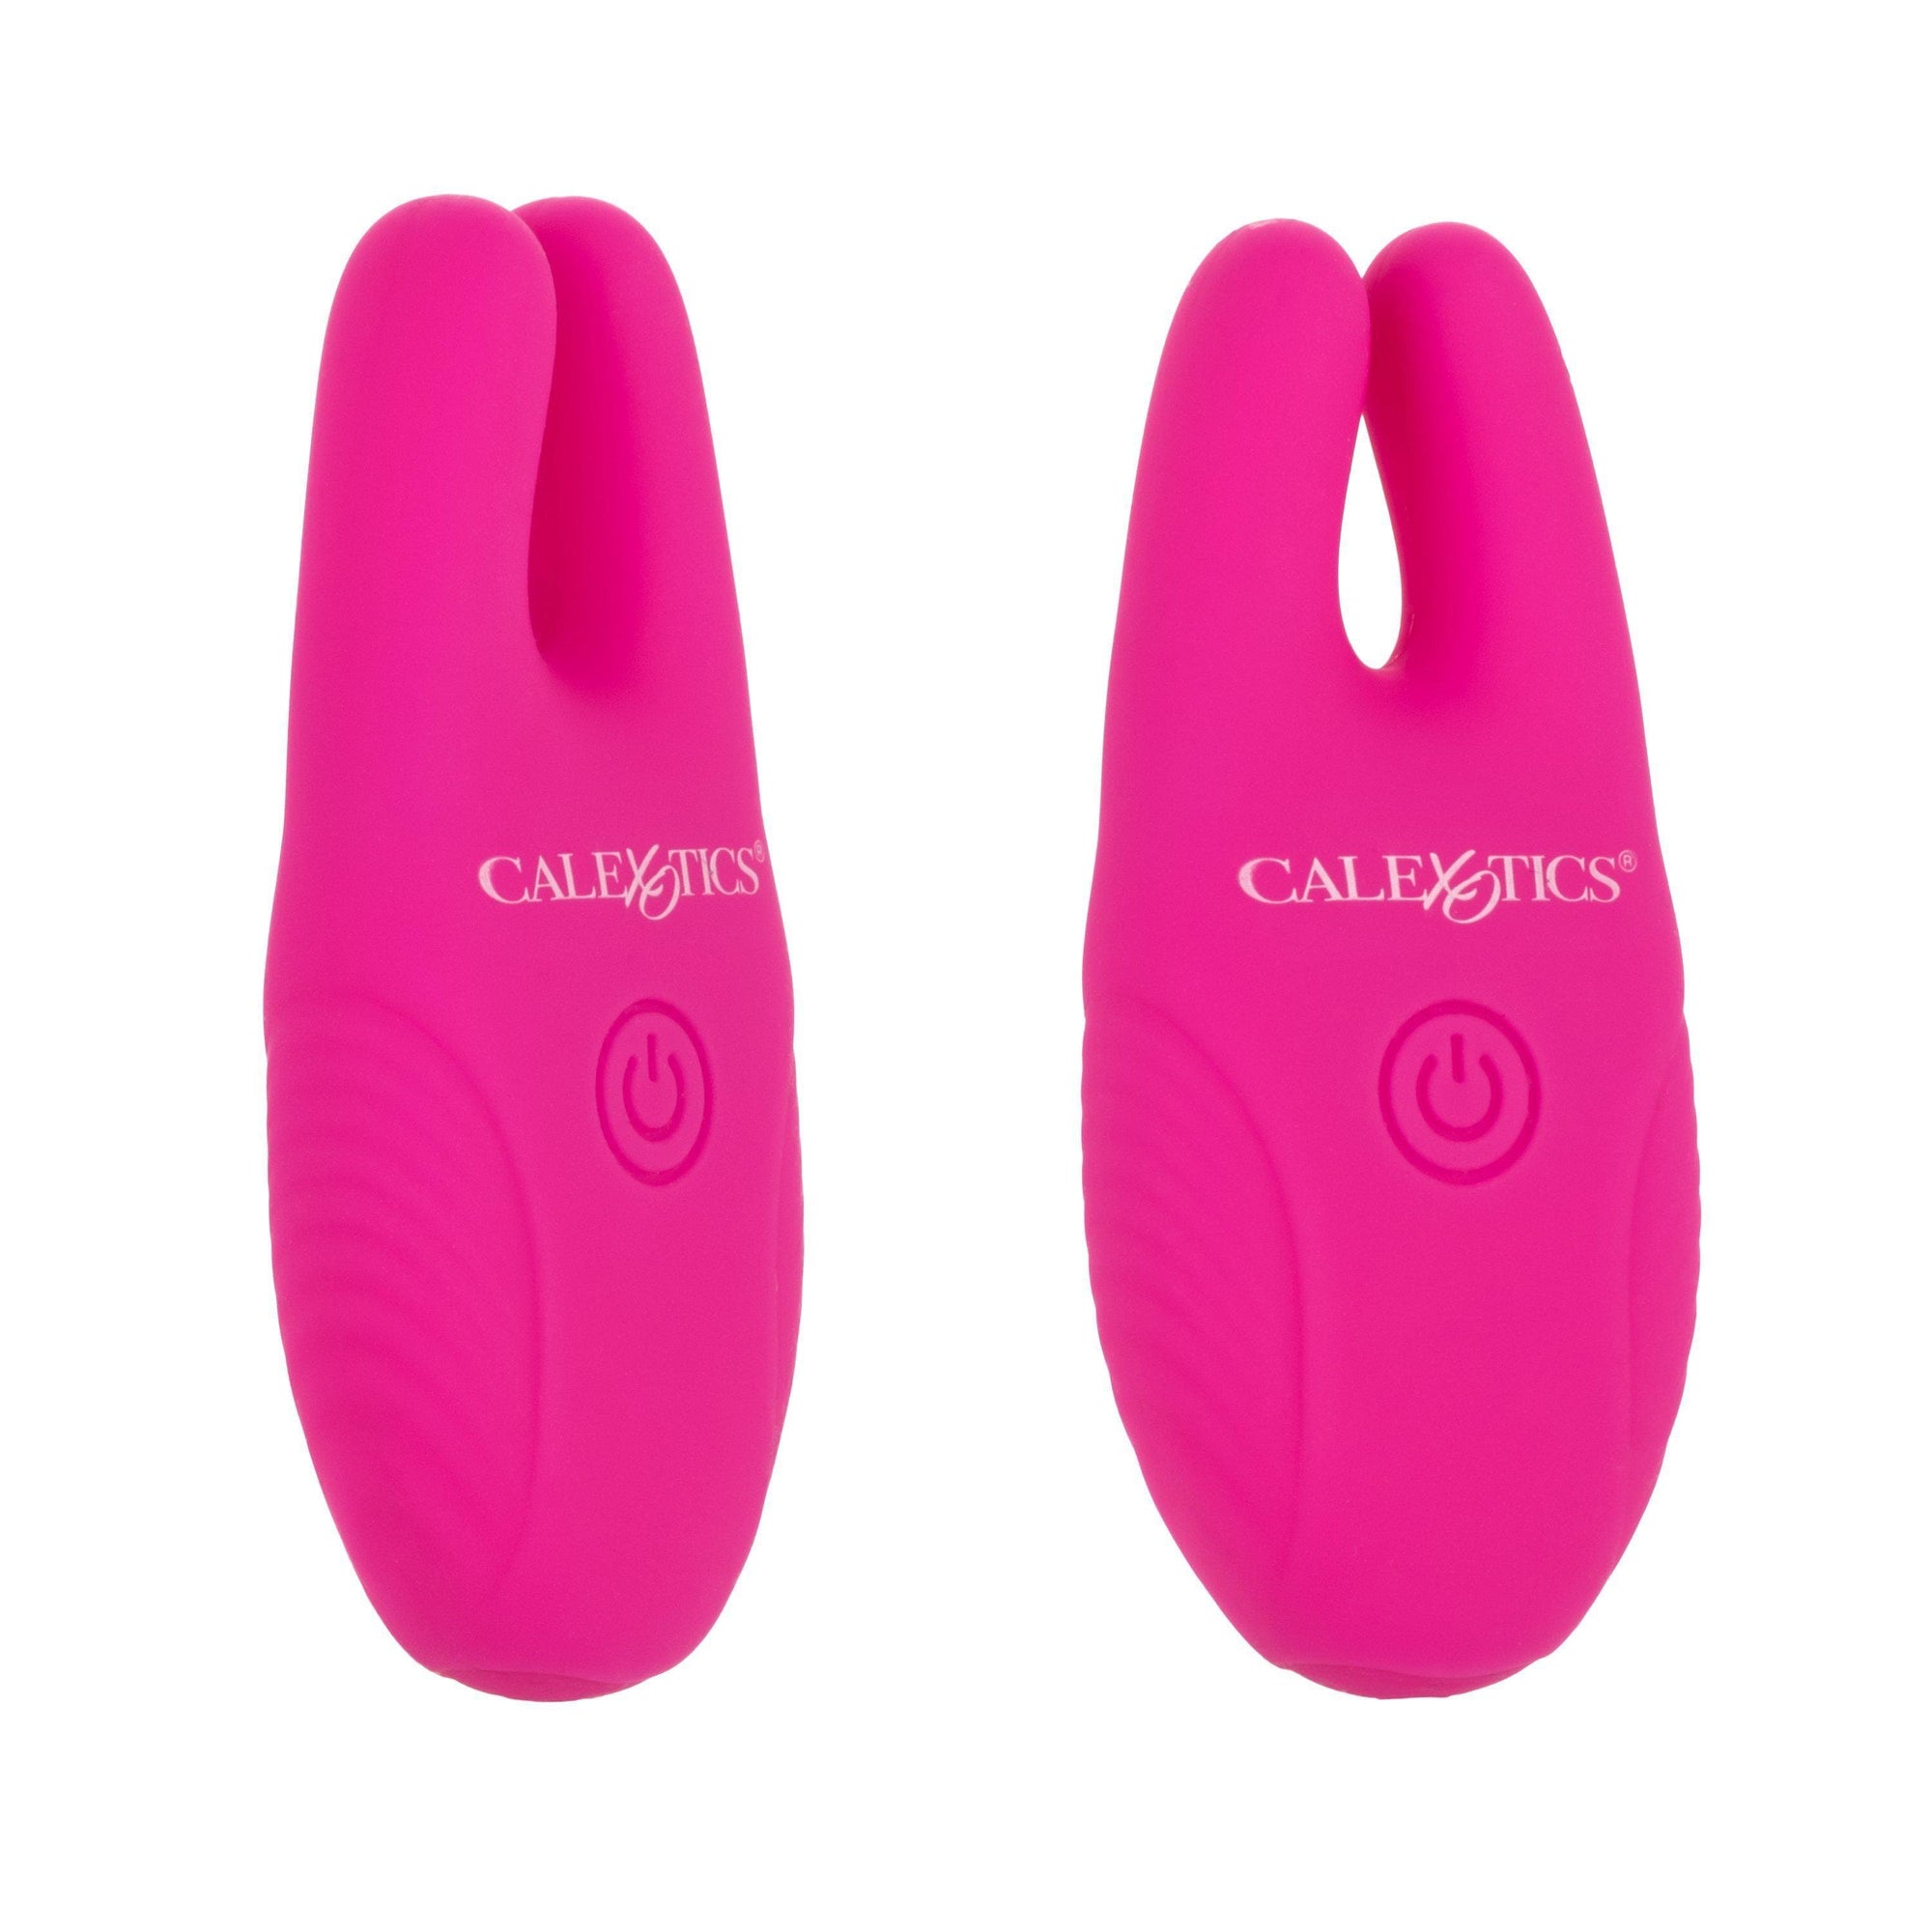 Silicone Remote Rechargeable 12 Function Vibrating Nipple Clamps - Romantic Blessings